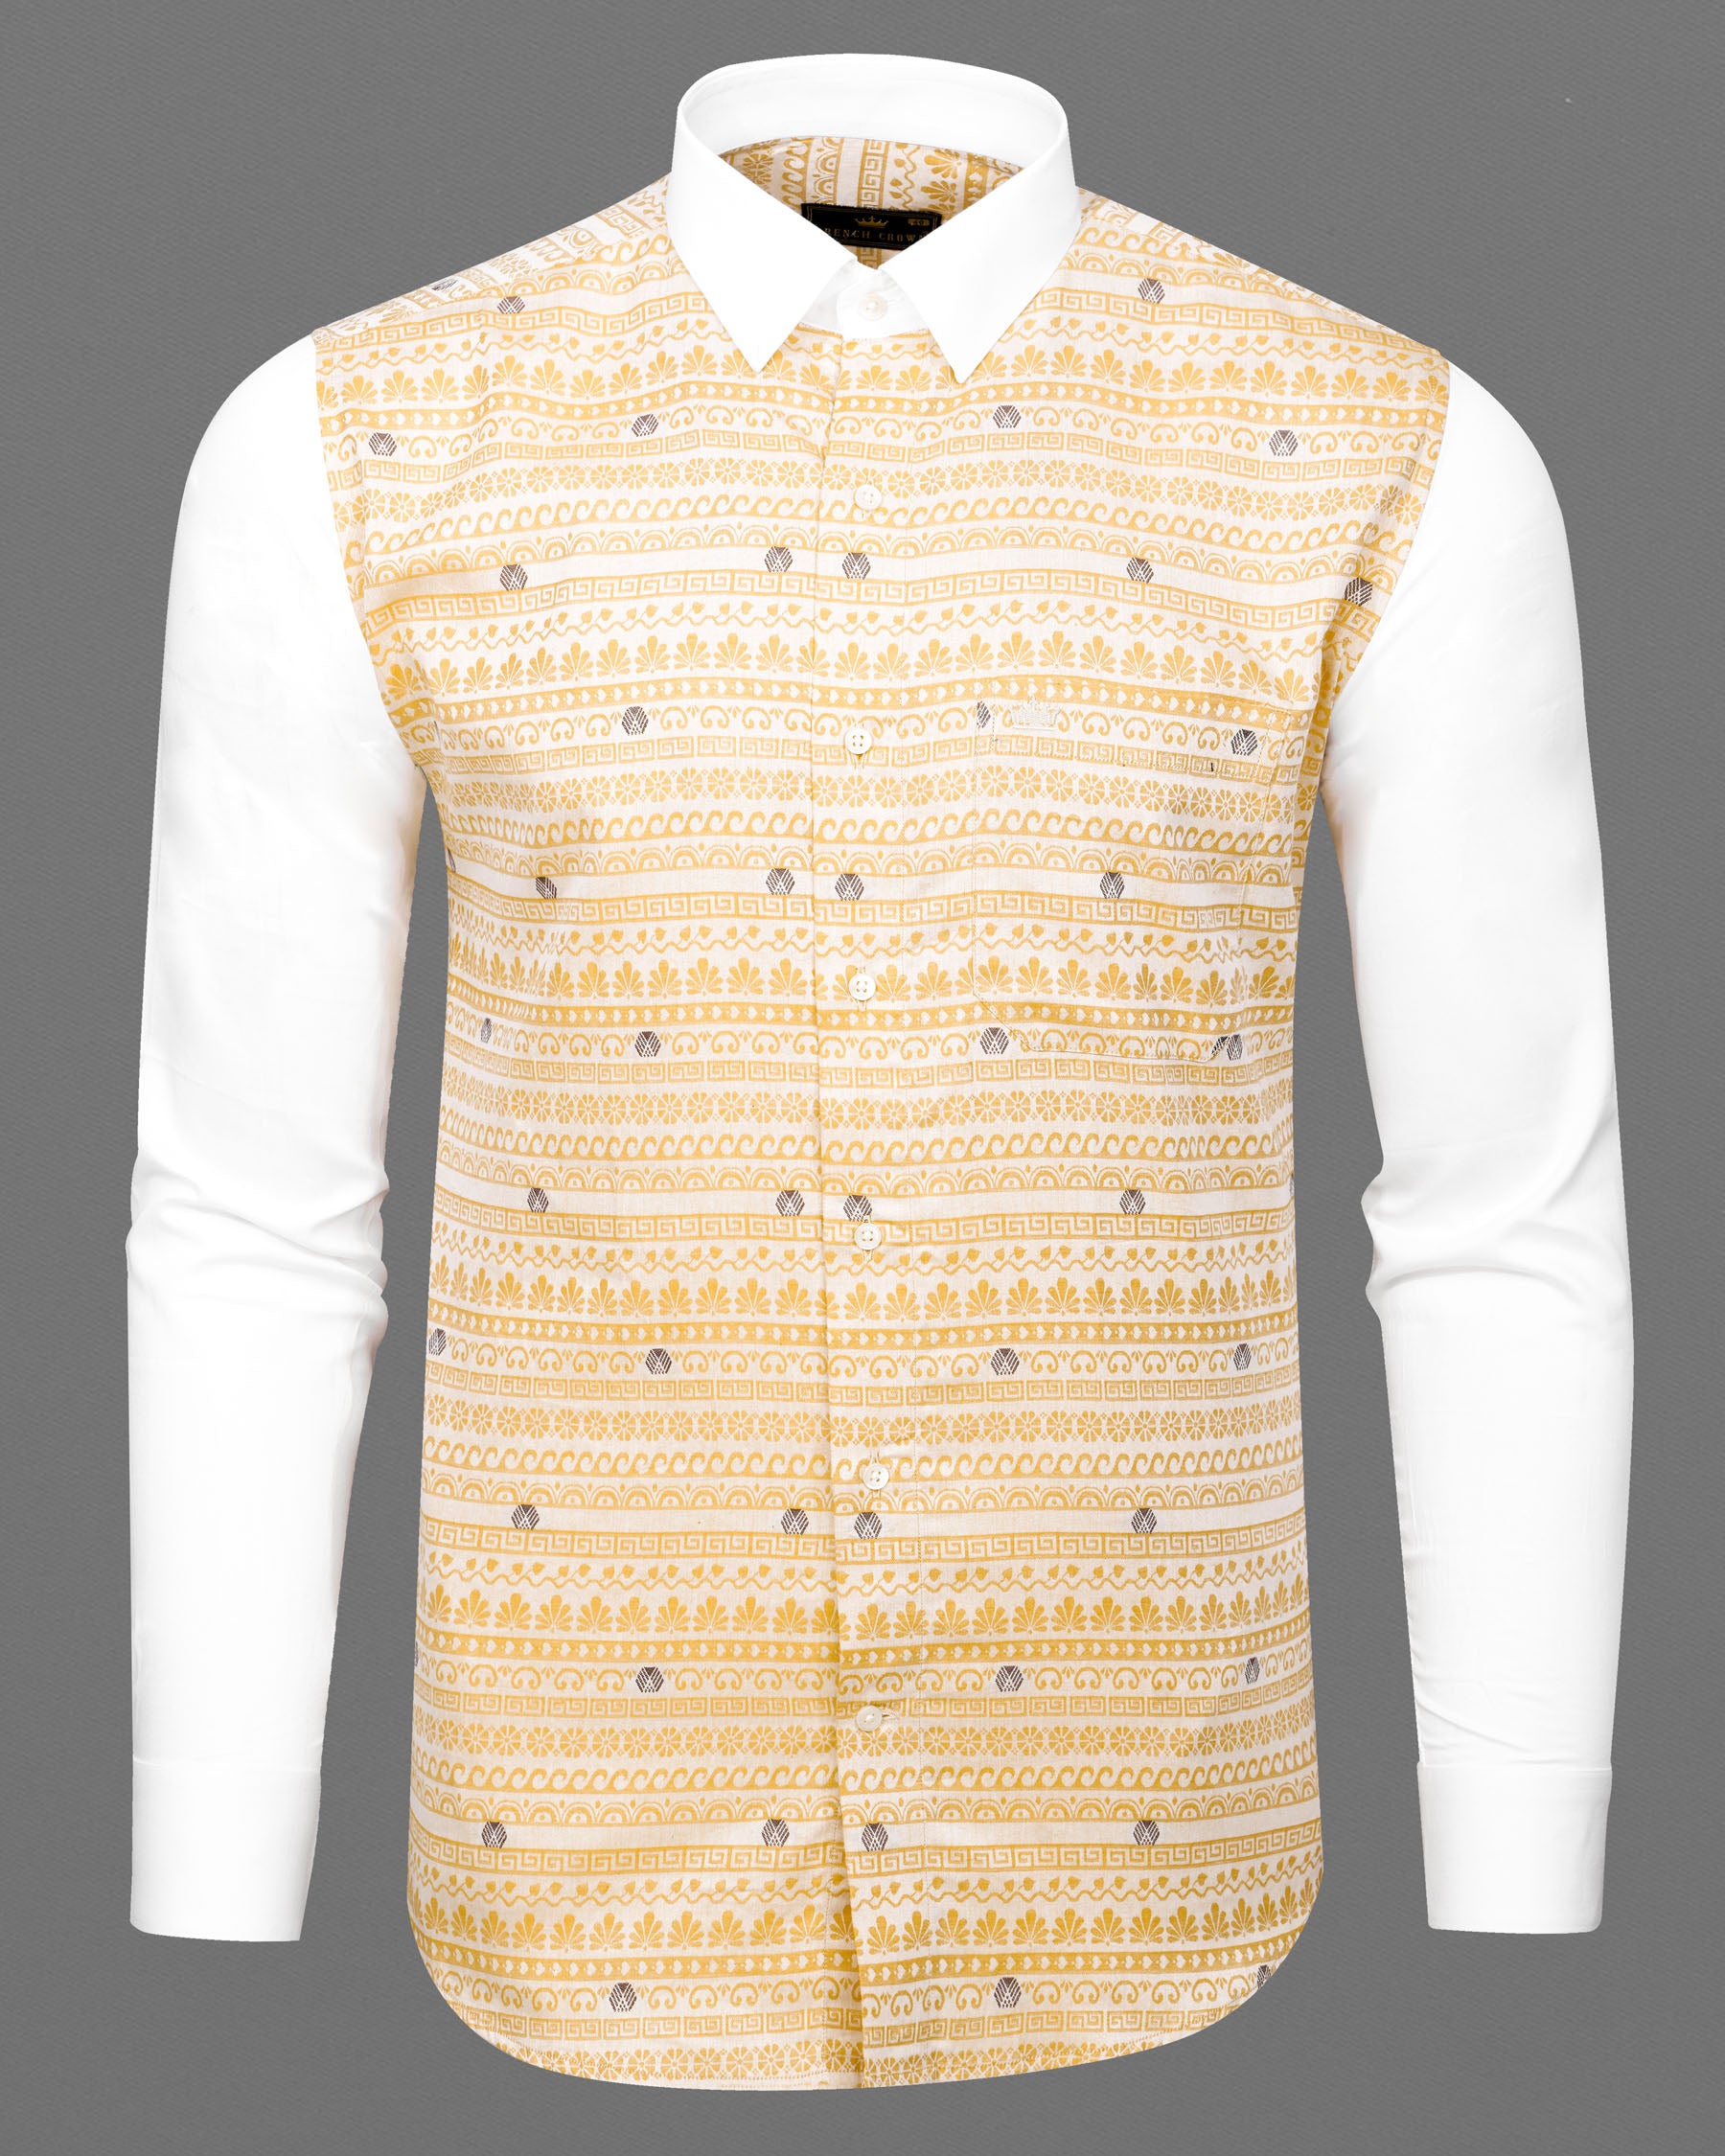 Apache Brown Tribal Jacquard Textured with White Collar and Sleeves Premium Giza Cotton Designer Shirt 7438-WCC-38, 7438-WCC-H-38, 7438-WCC-39, 7438-WCC-H-39, 7438-WCC-40, 7438-WCC-H-40, 7438-WCC-42, 7438-WCC-H-42, 7438-WCC-44, 7438-WCC-H-44, 7438-WCC-46, 7438-WCC-H-46, 7438-WCC-48, 7438-WCC-H-48, 7438-WCC-50, 7438-WCC-H-50, 7438-WCC-52, 7438-WCC-H-52